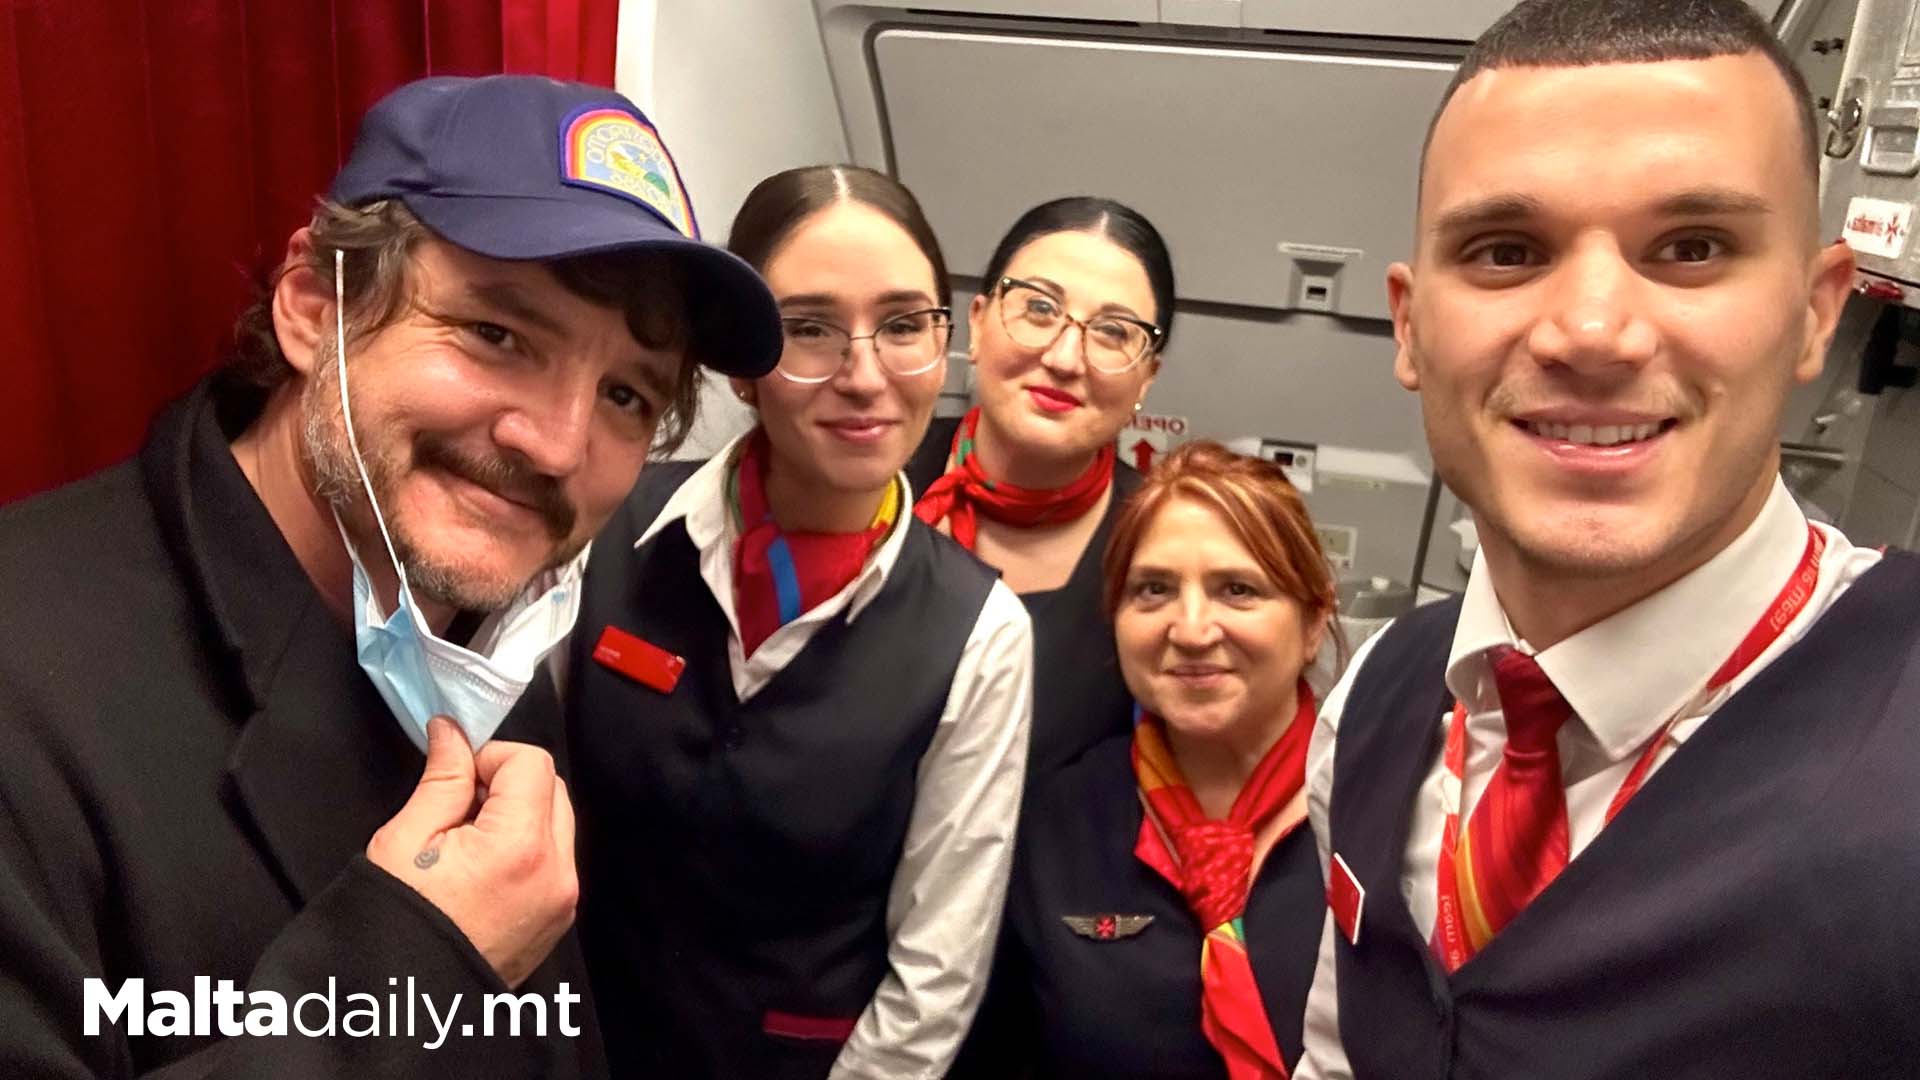 Thank You For Flying Air Malta, Pedro Pascal